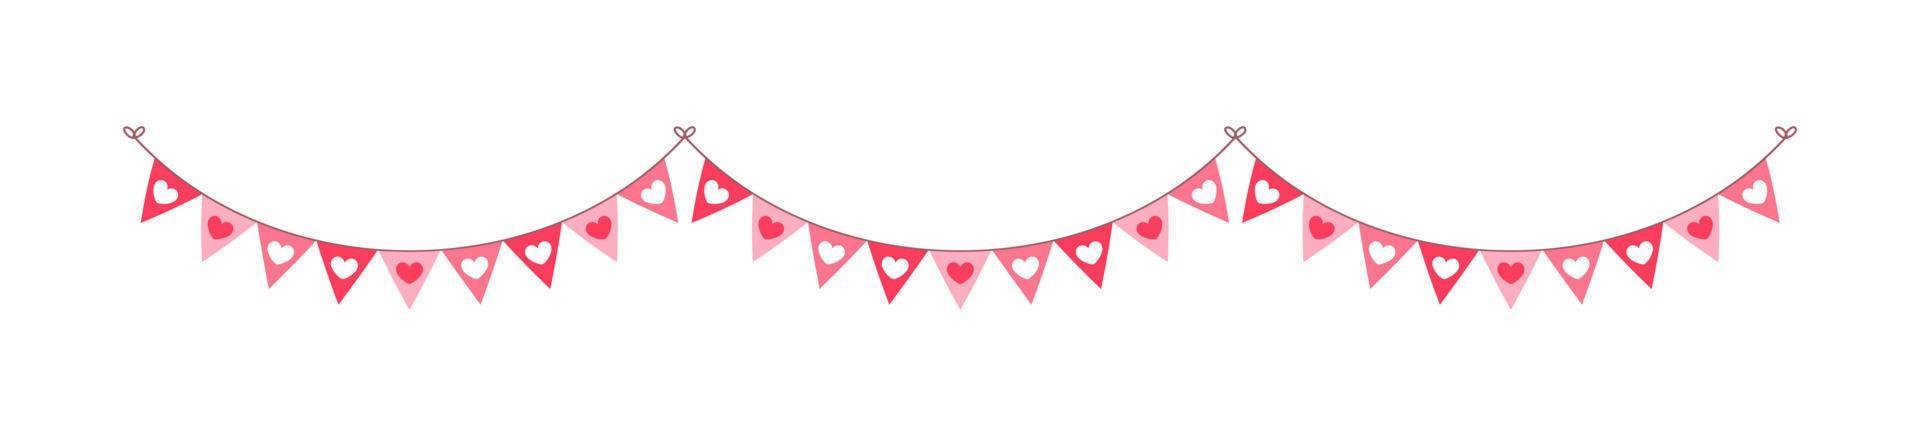 Valentine's Day red hearts banner bunting vector illustration clipart